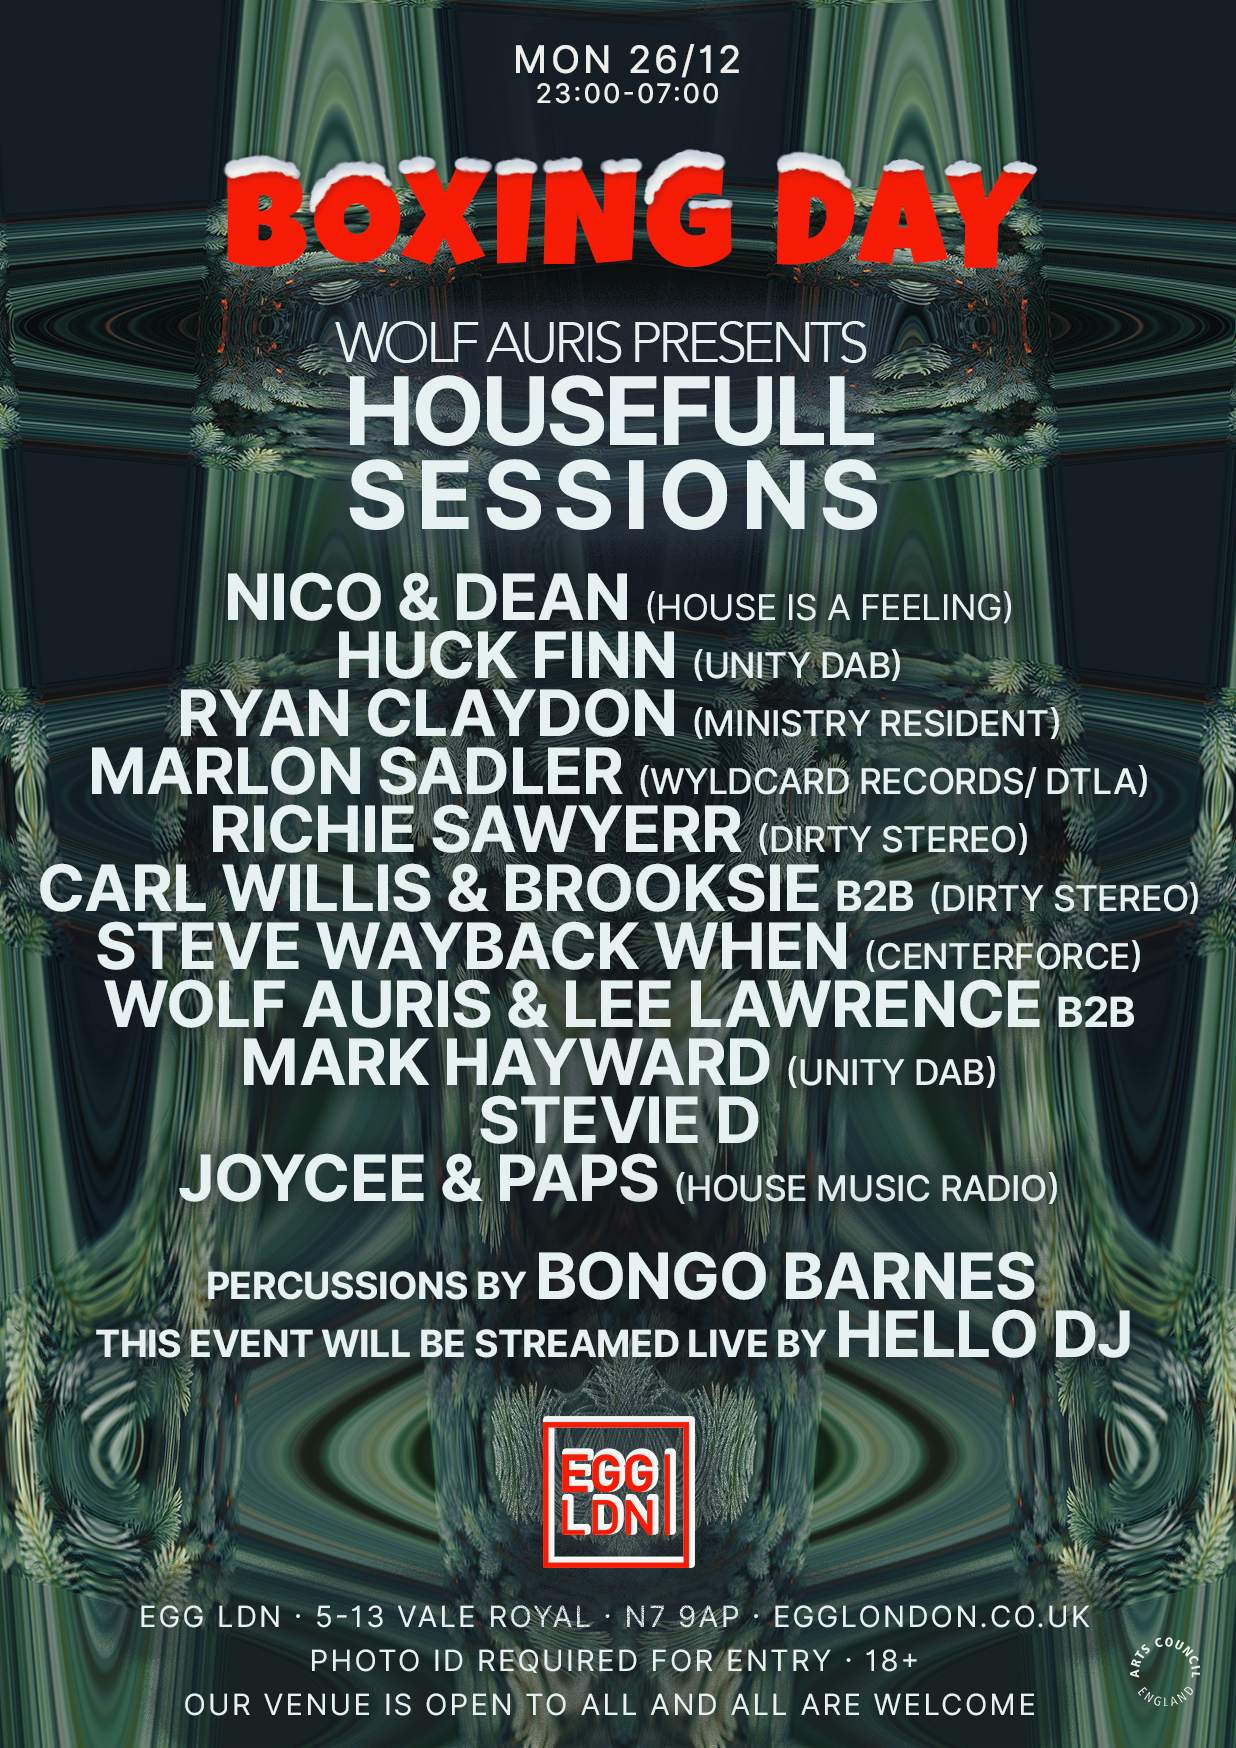 Egg LDN Pres: Boxing Day Special / Wolf Auris presents Housefull Sessions - フライヤー裏